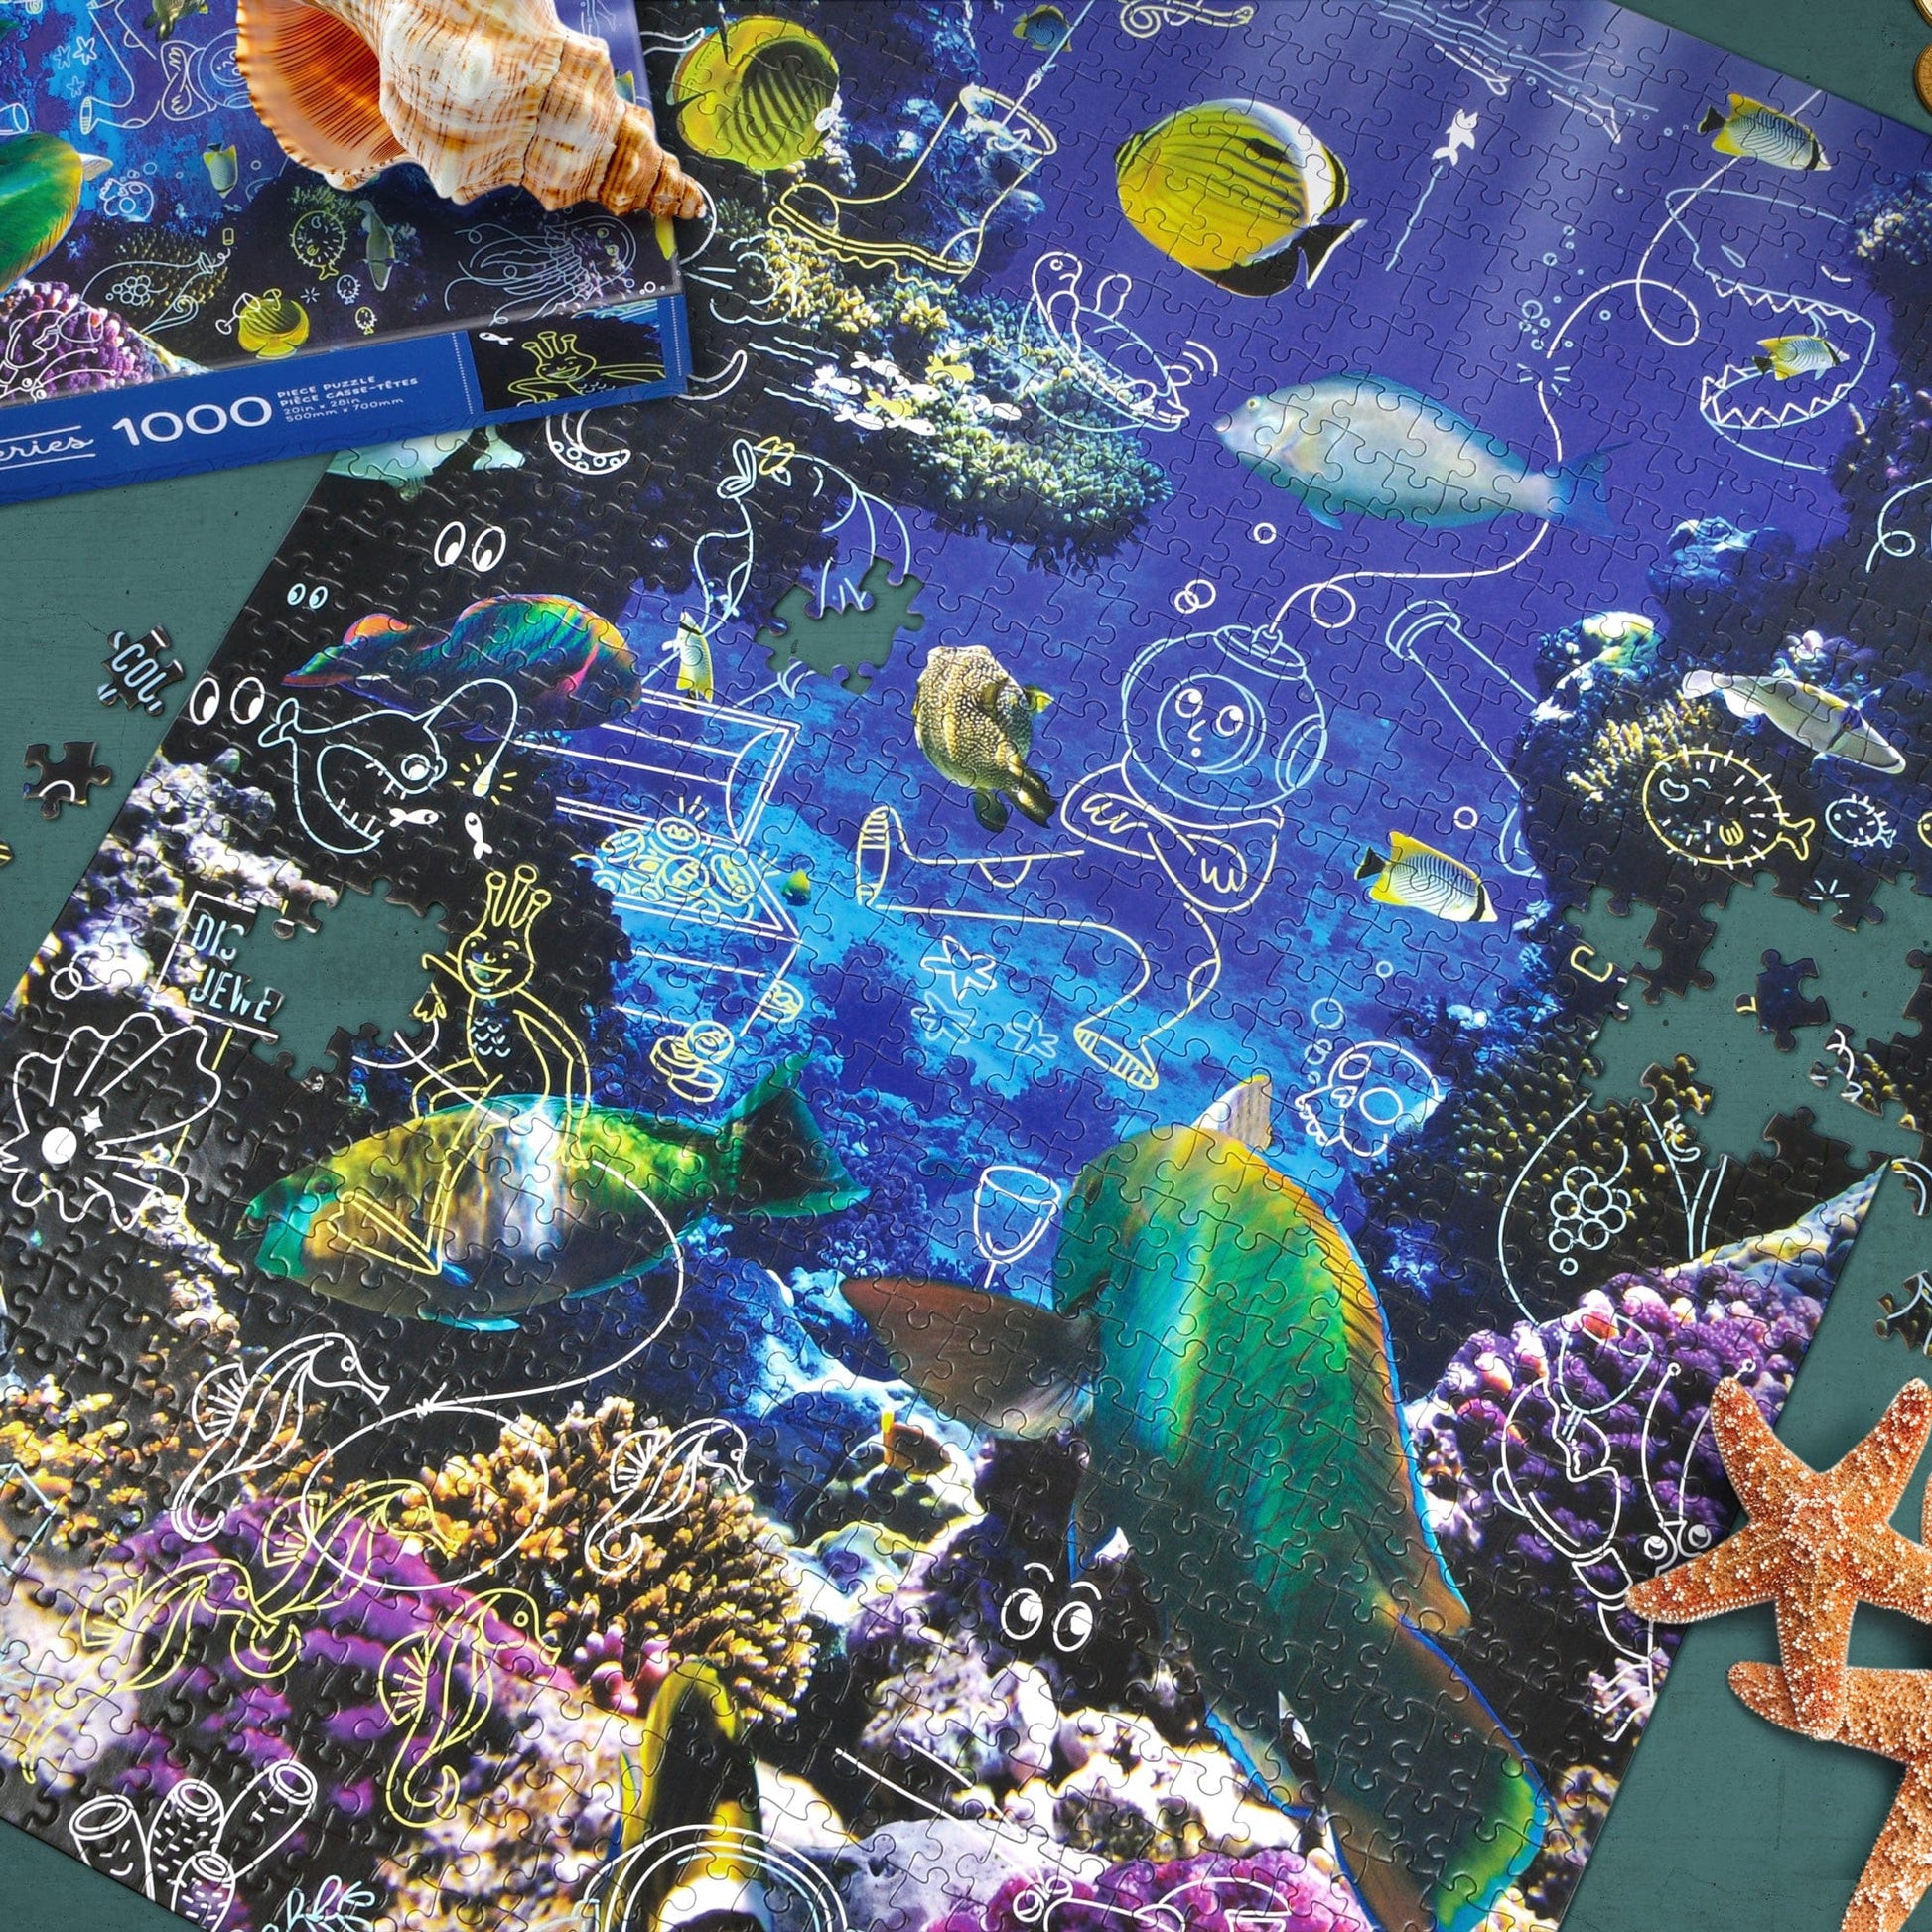 Swap Meet Under the Sea 1000 Piece Jigsaw Puzzle Fred